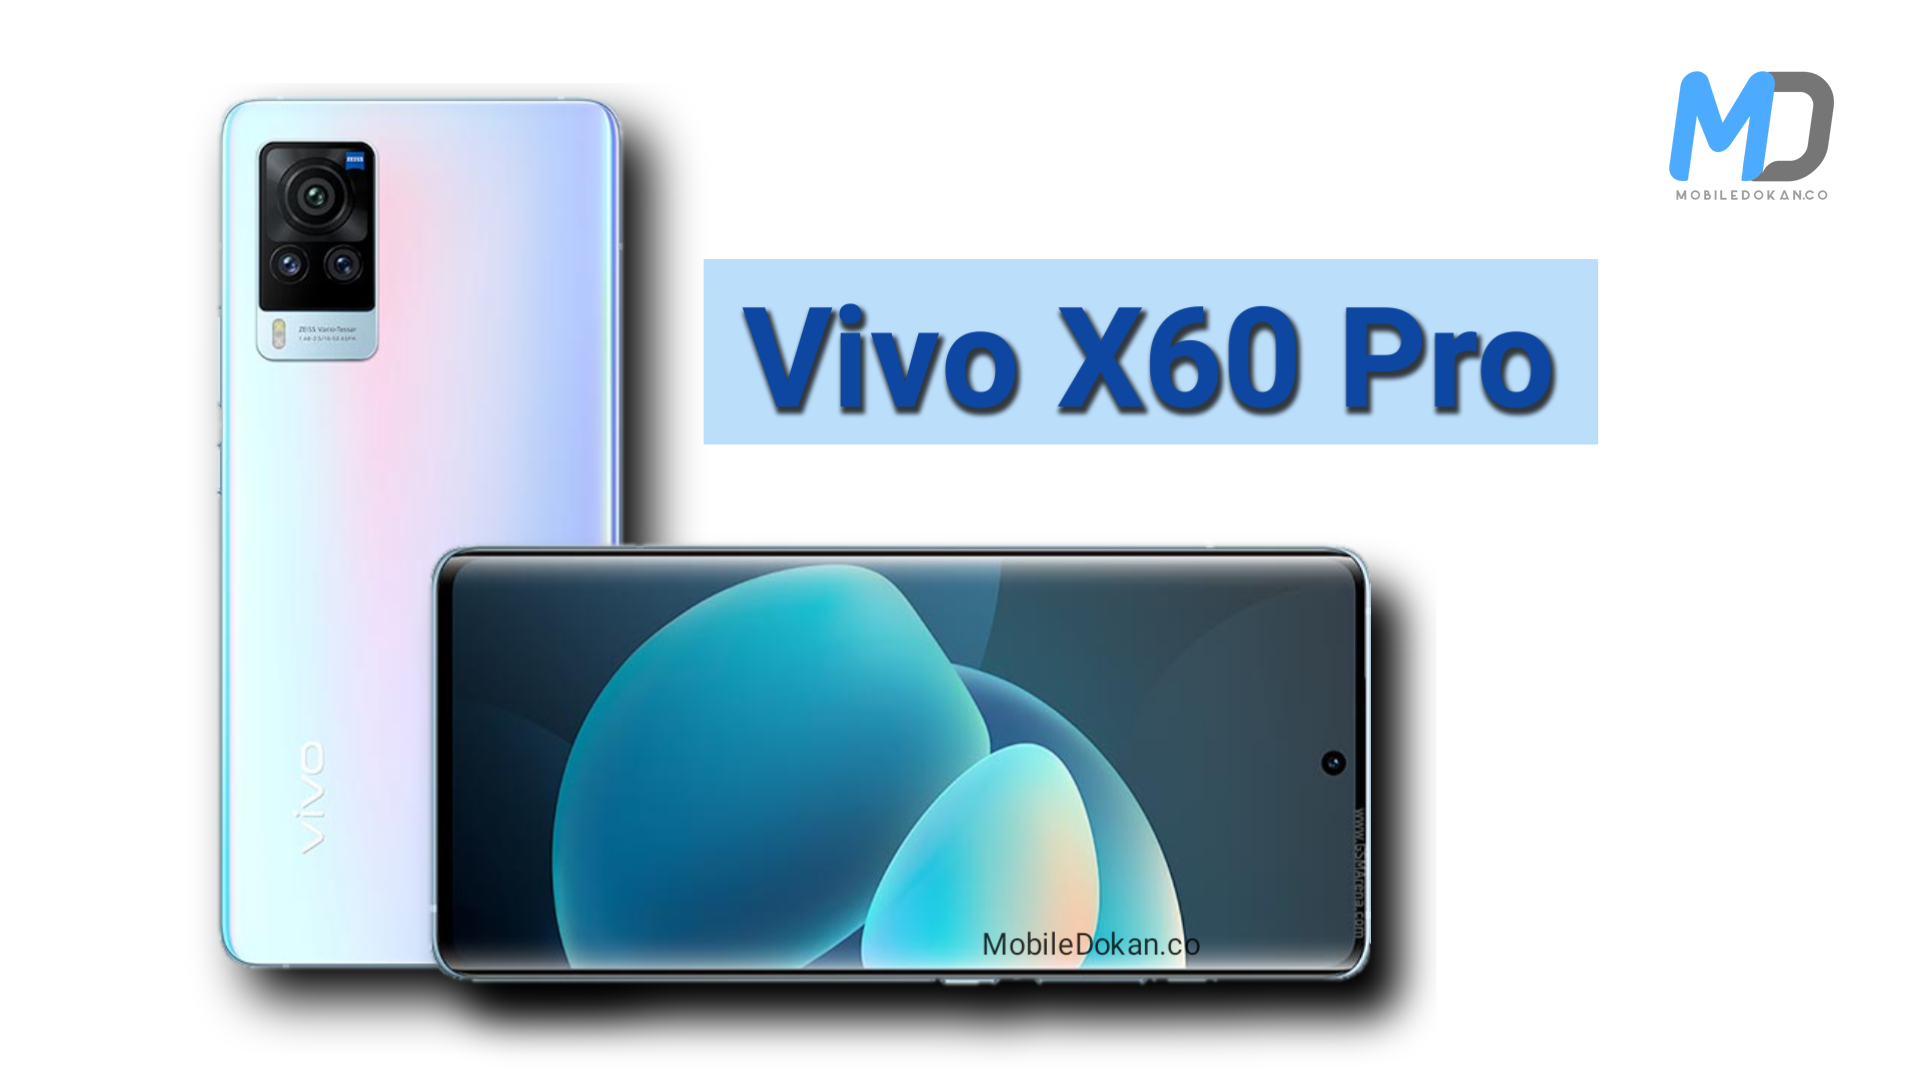 Vivo X60 Pro Price in Bangladesh is BDT 70,000 taka, already launched on March 22